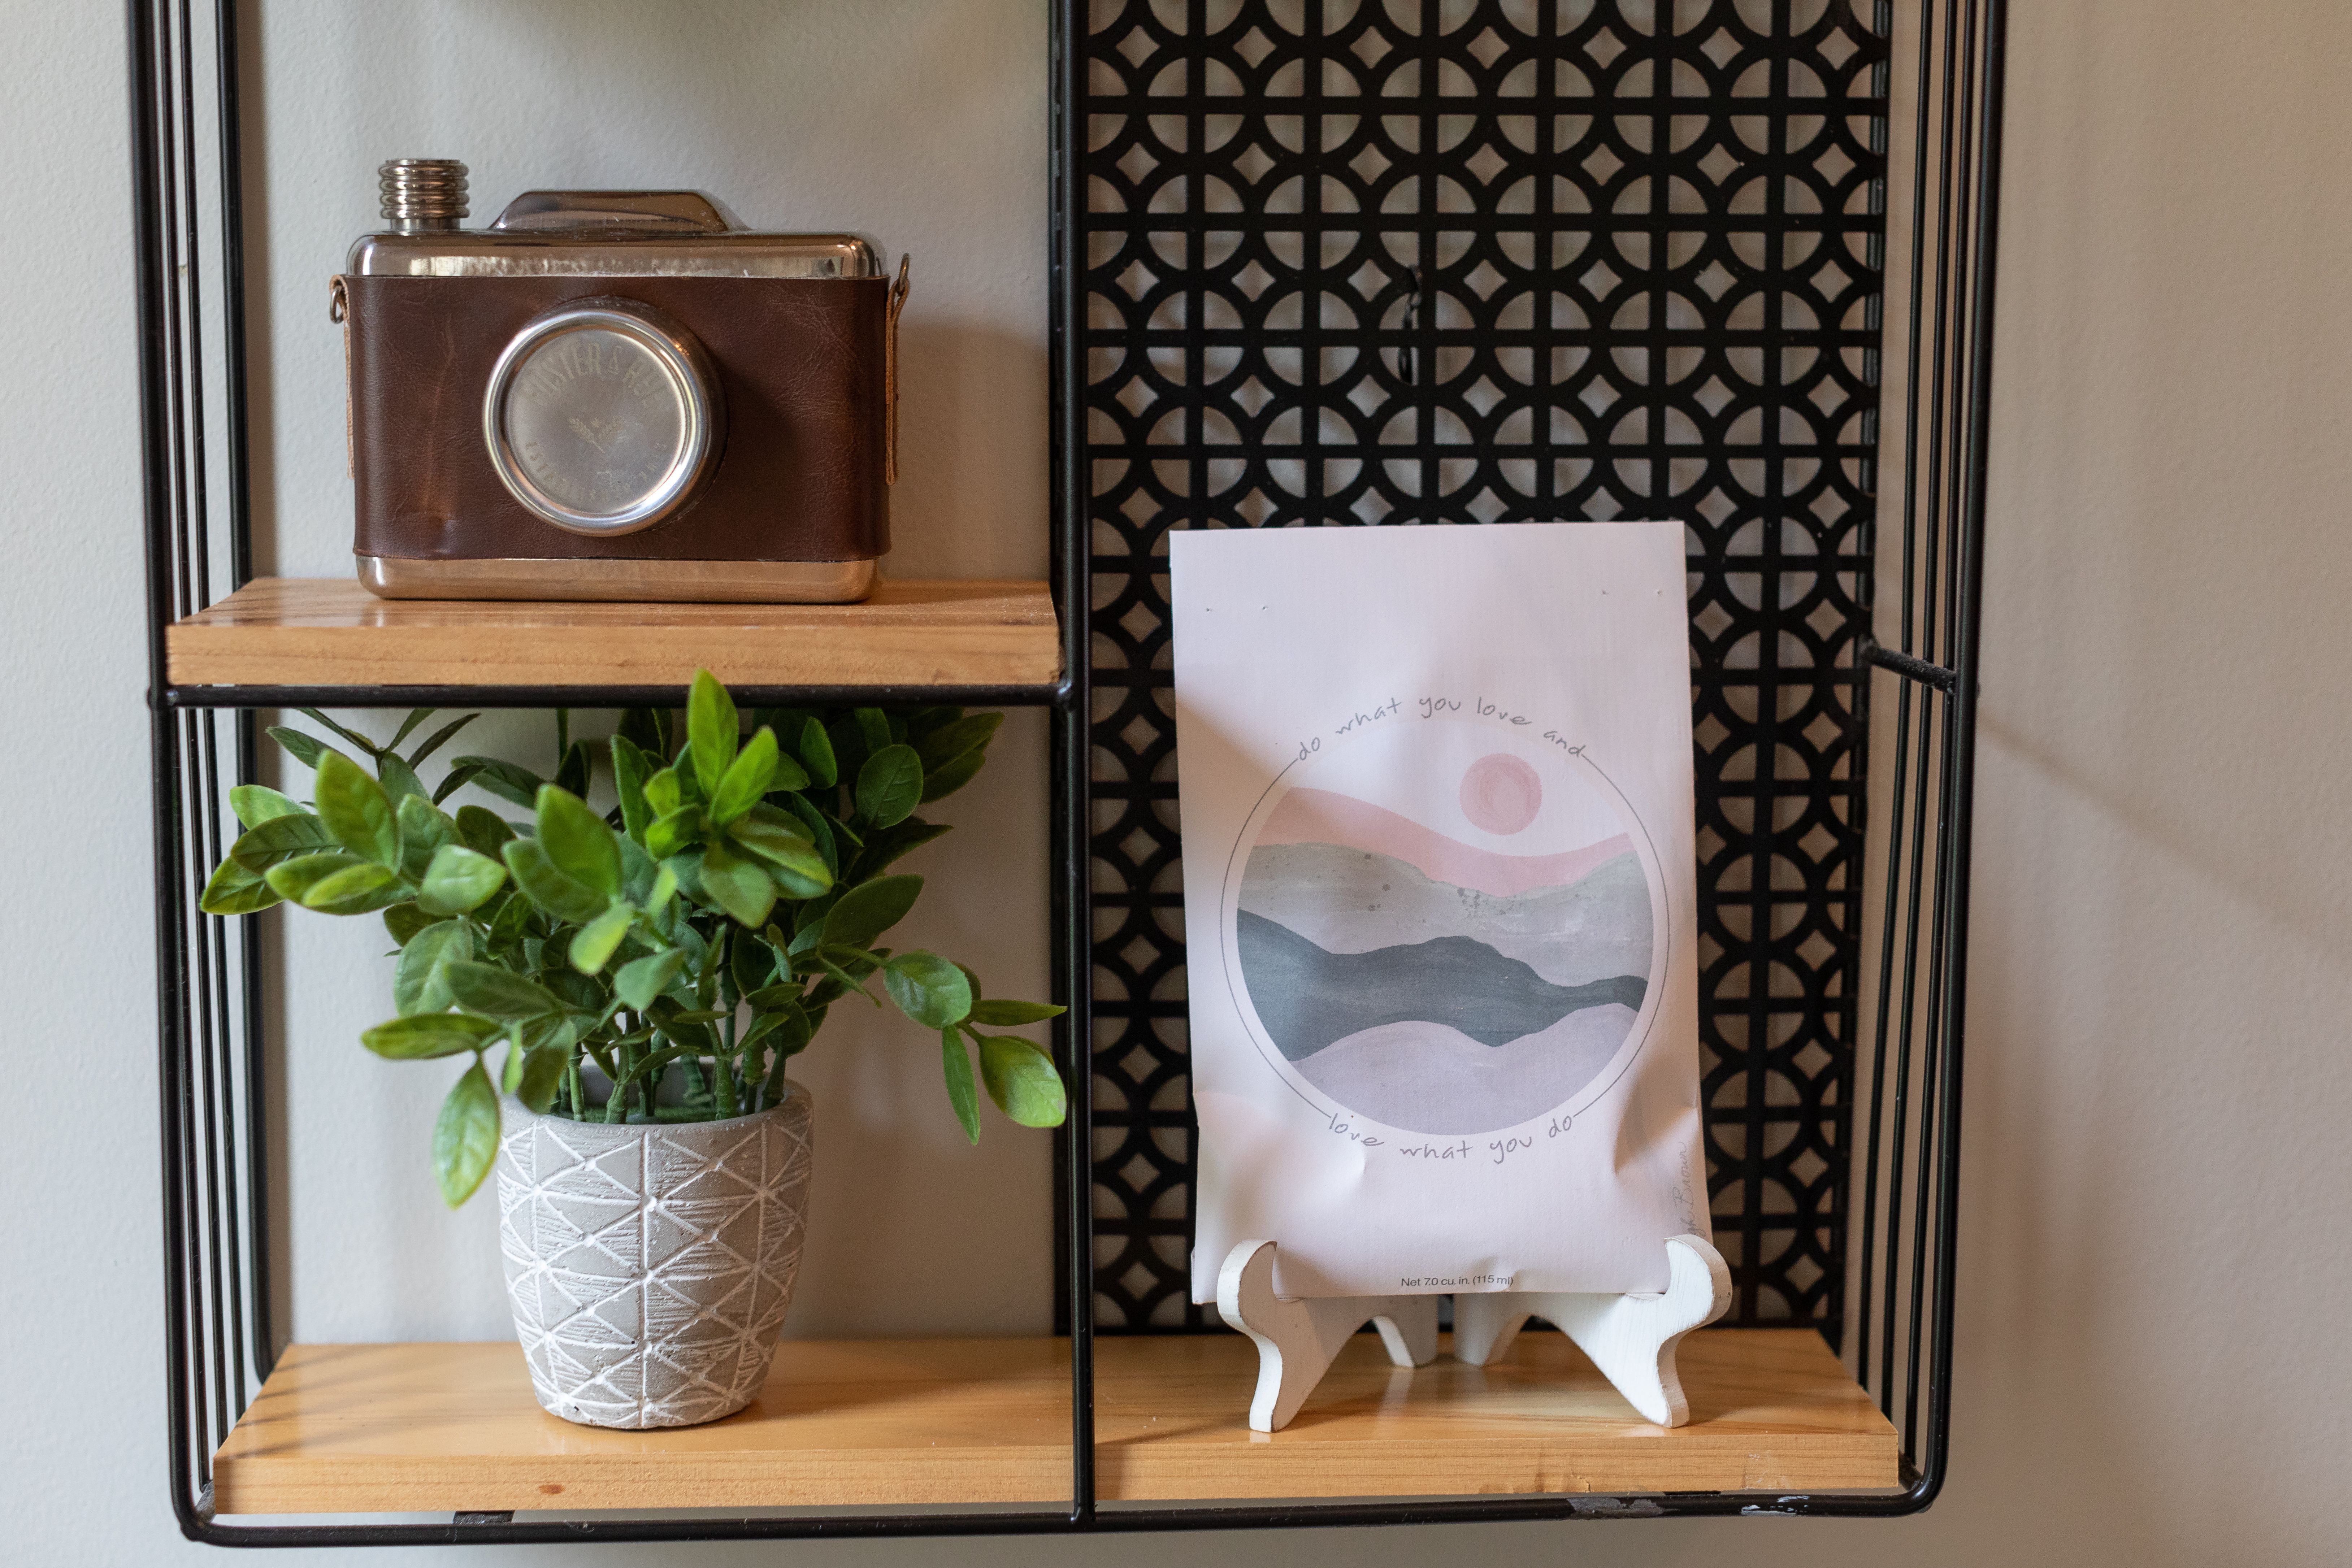  Do What you Love Sachet on Shelf with Plants and Vintage Camera